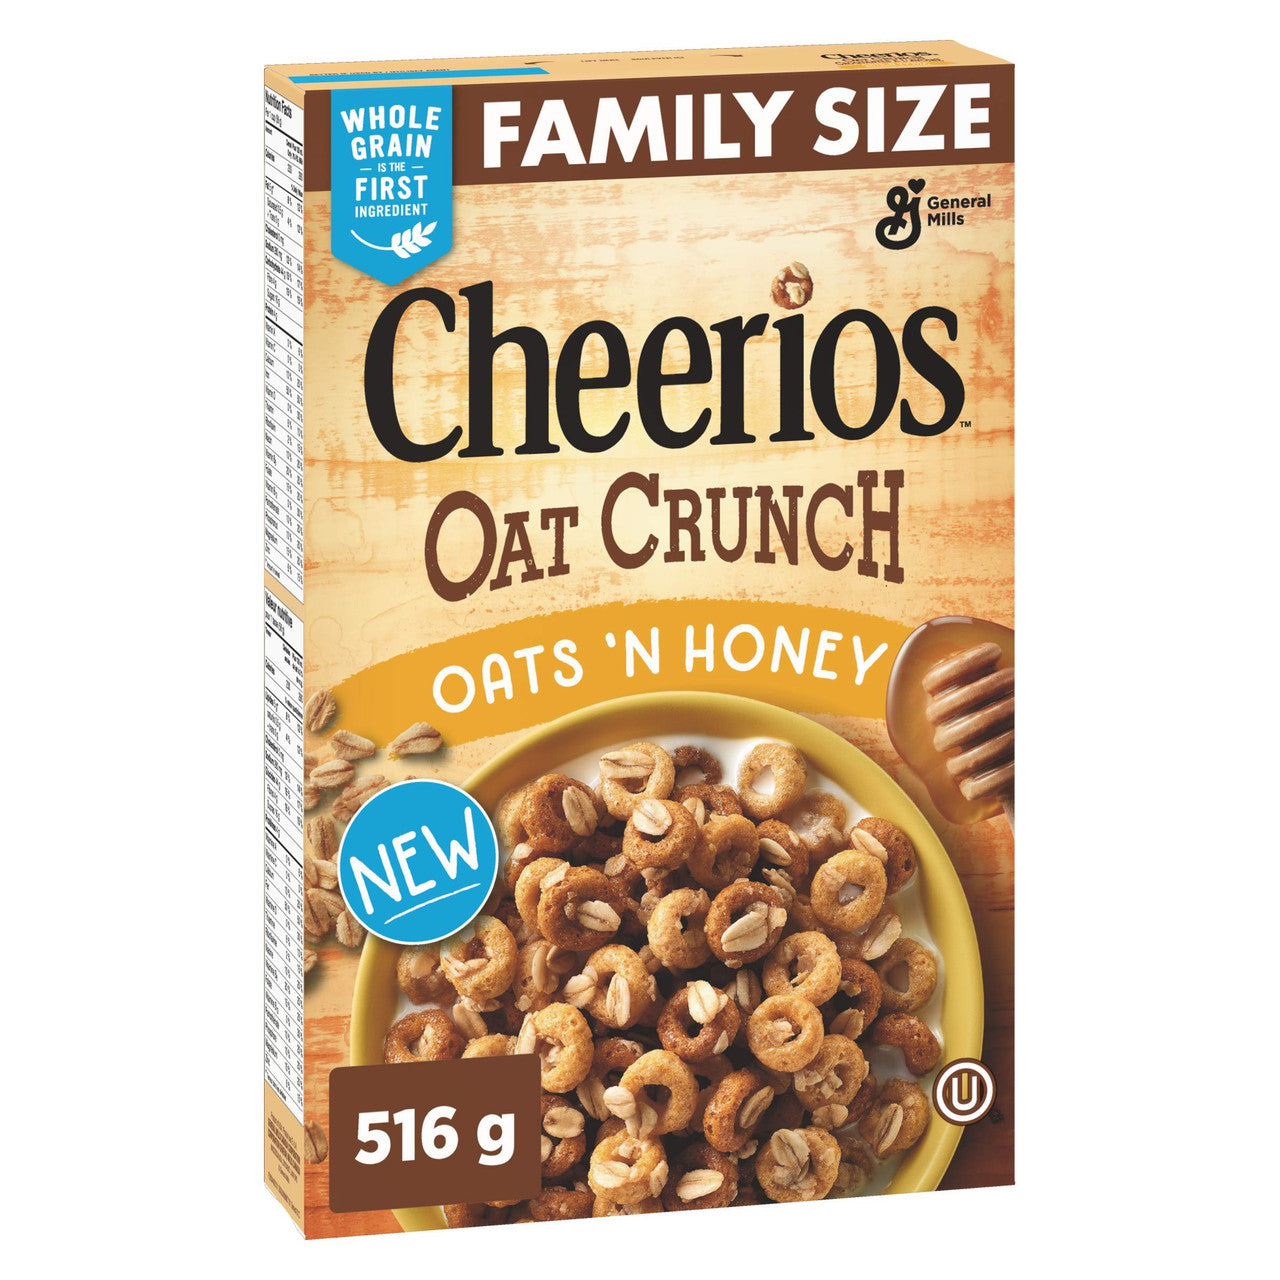 Cheerios Oat Crunch Oats 'N Honey Cereal, 516g/18.2 oz., {Imported from Canada}